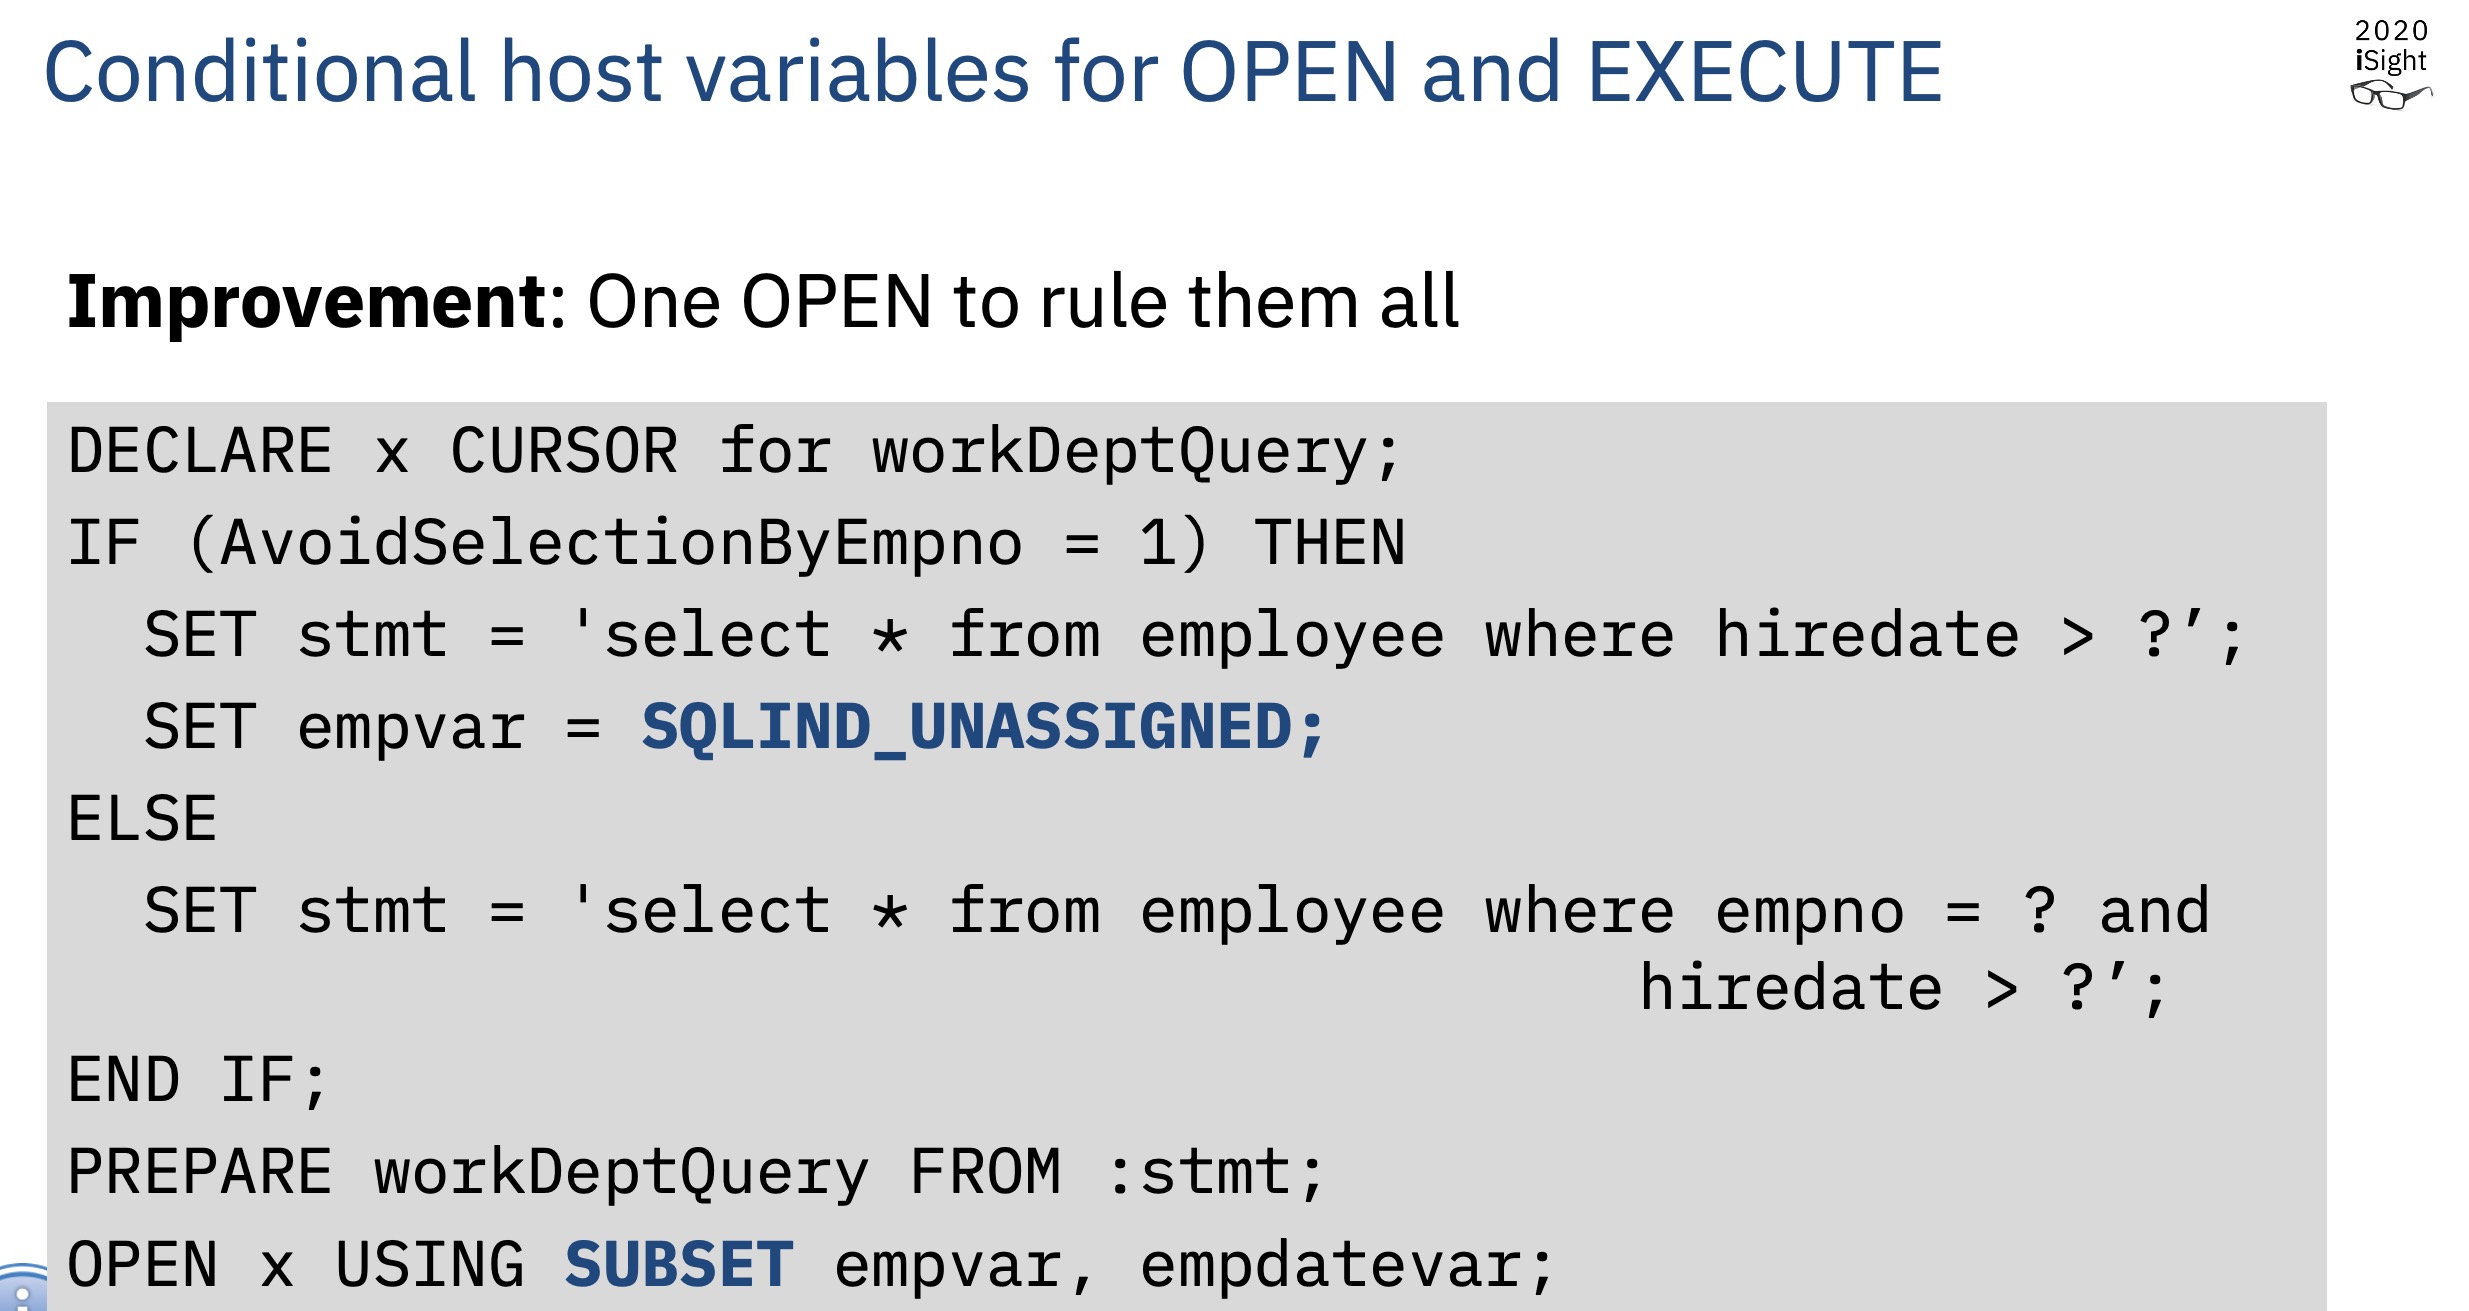 using subset on open or execute